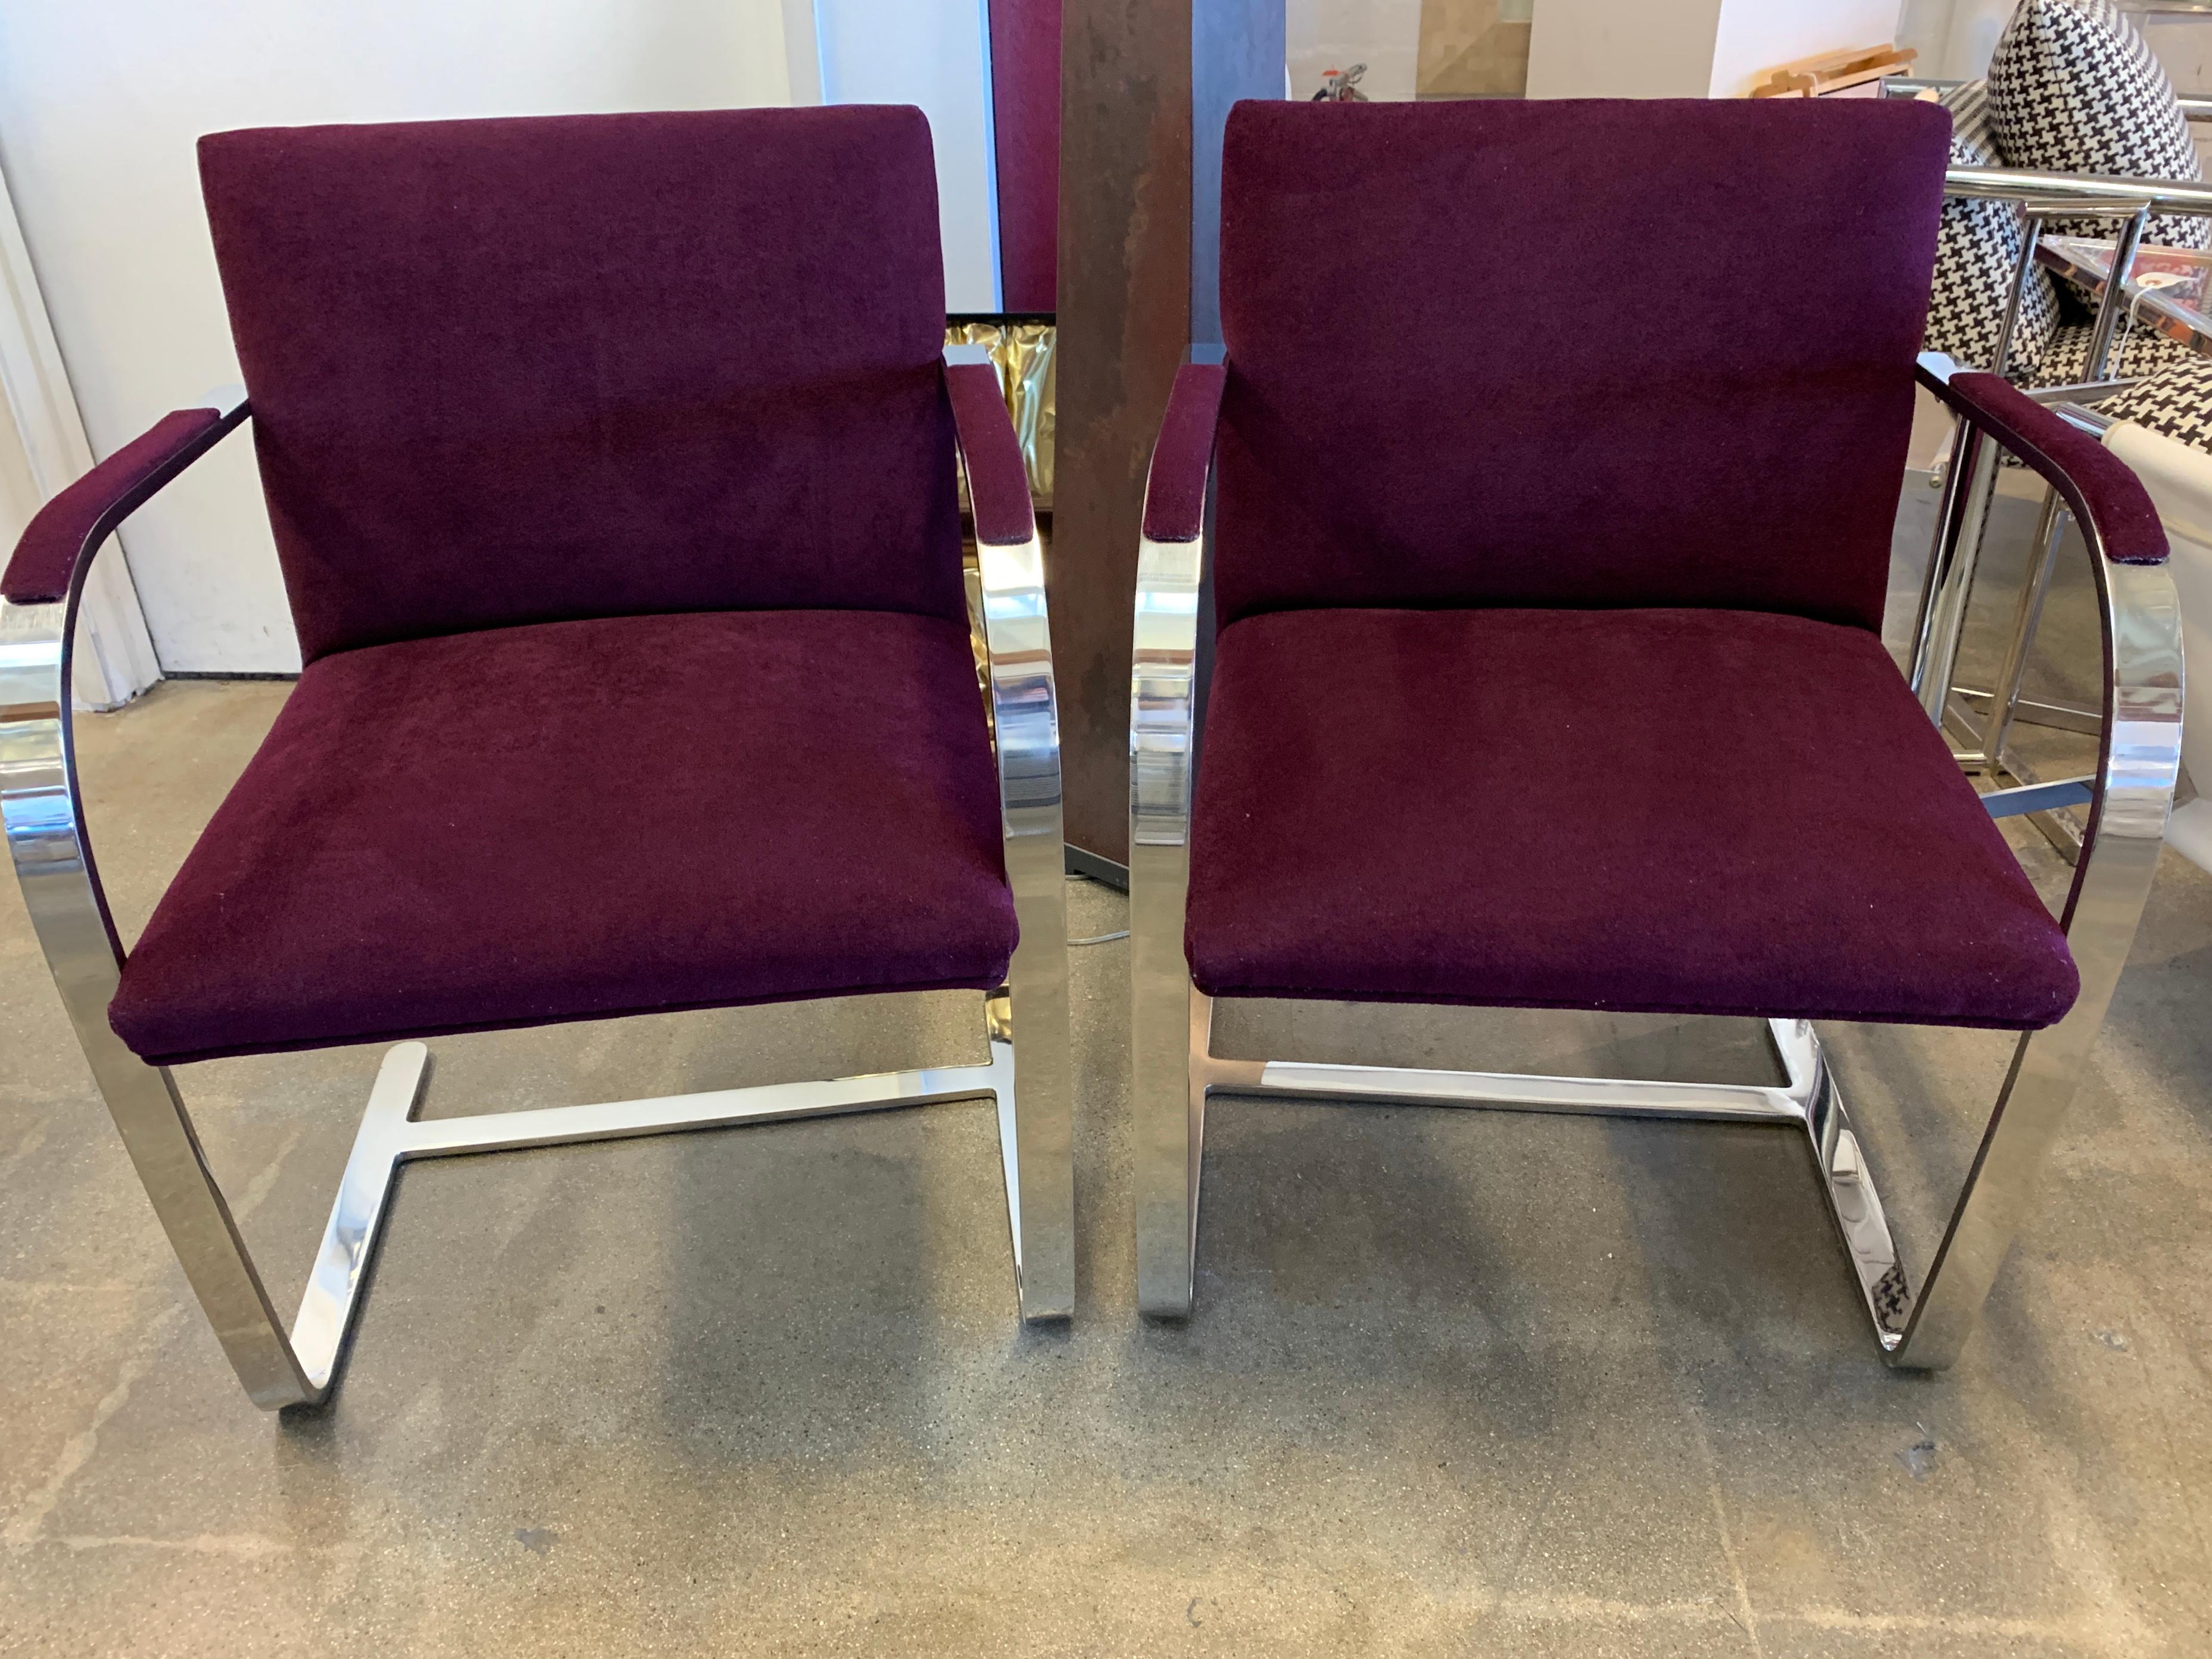 A nice pair of Labeled Knoll Mies van der Rohe flat bar chairs. Only one chair still bears the label which dates to 1980. The original fabric was brick red but we had the chairs re-upholstered. We had the upholsterer re-use the original labels. They